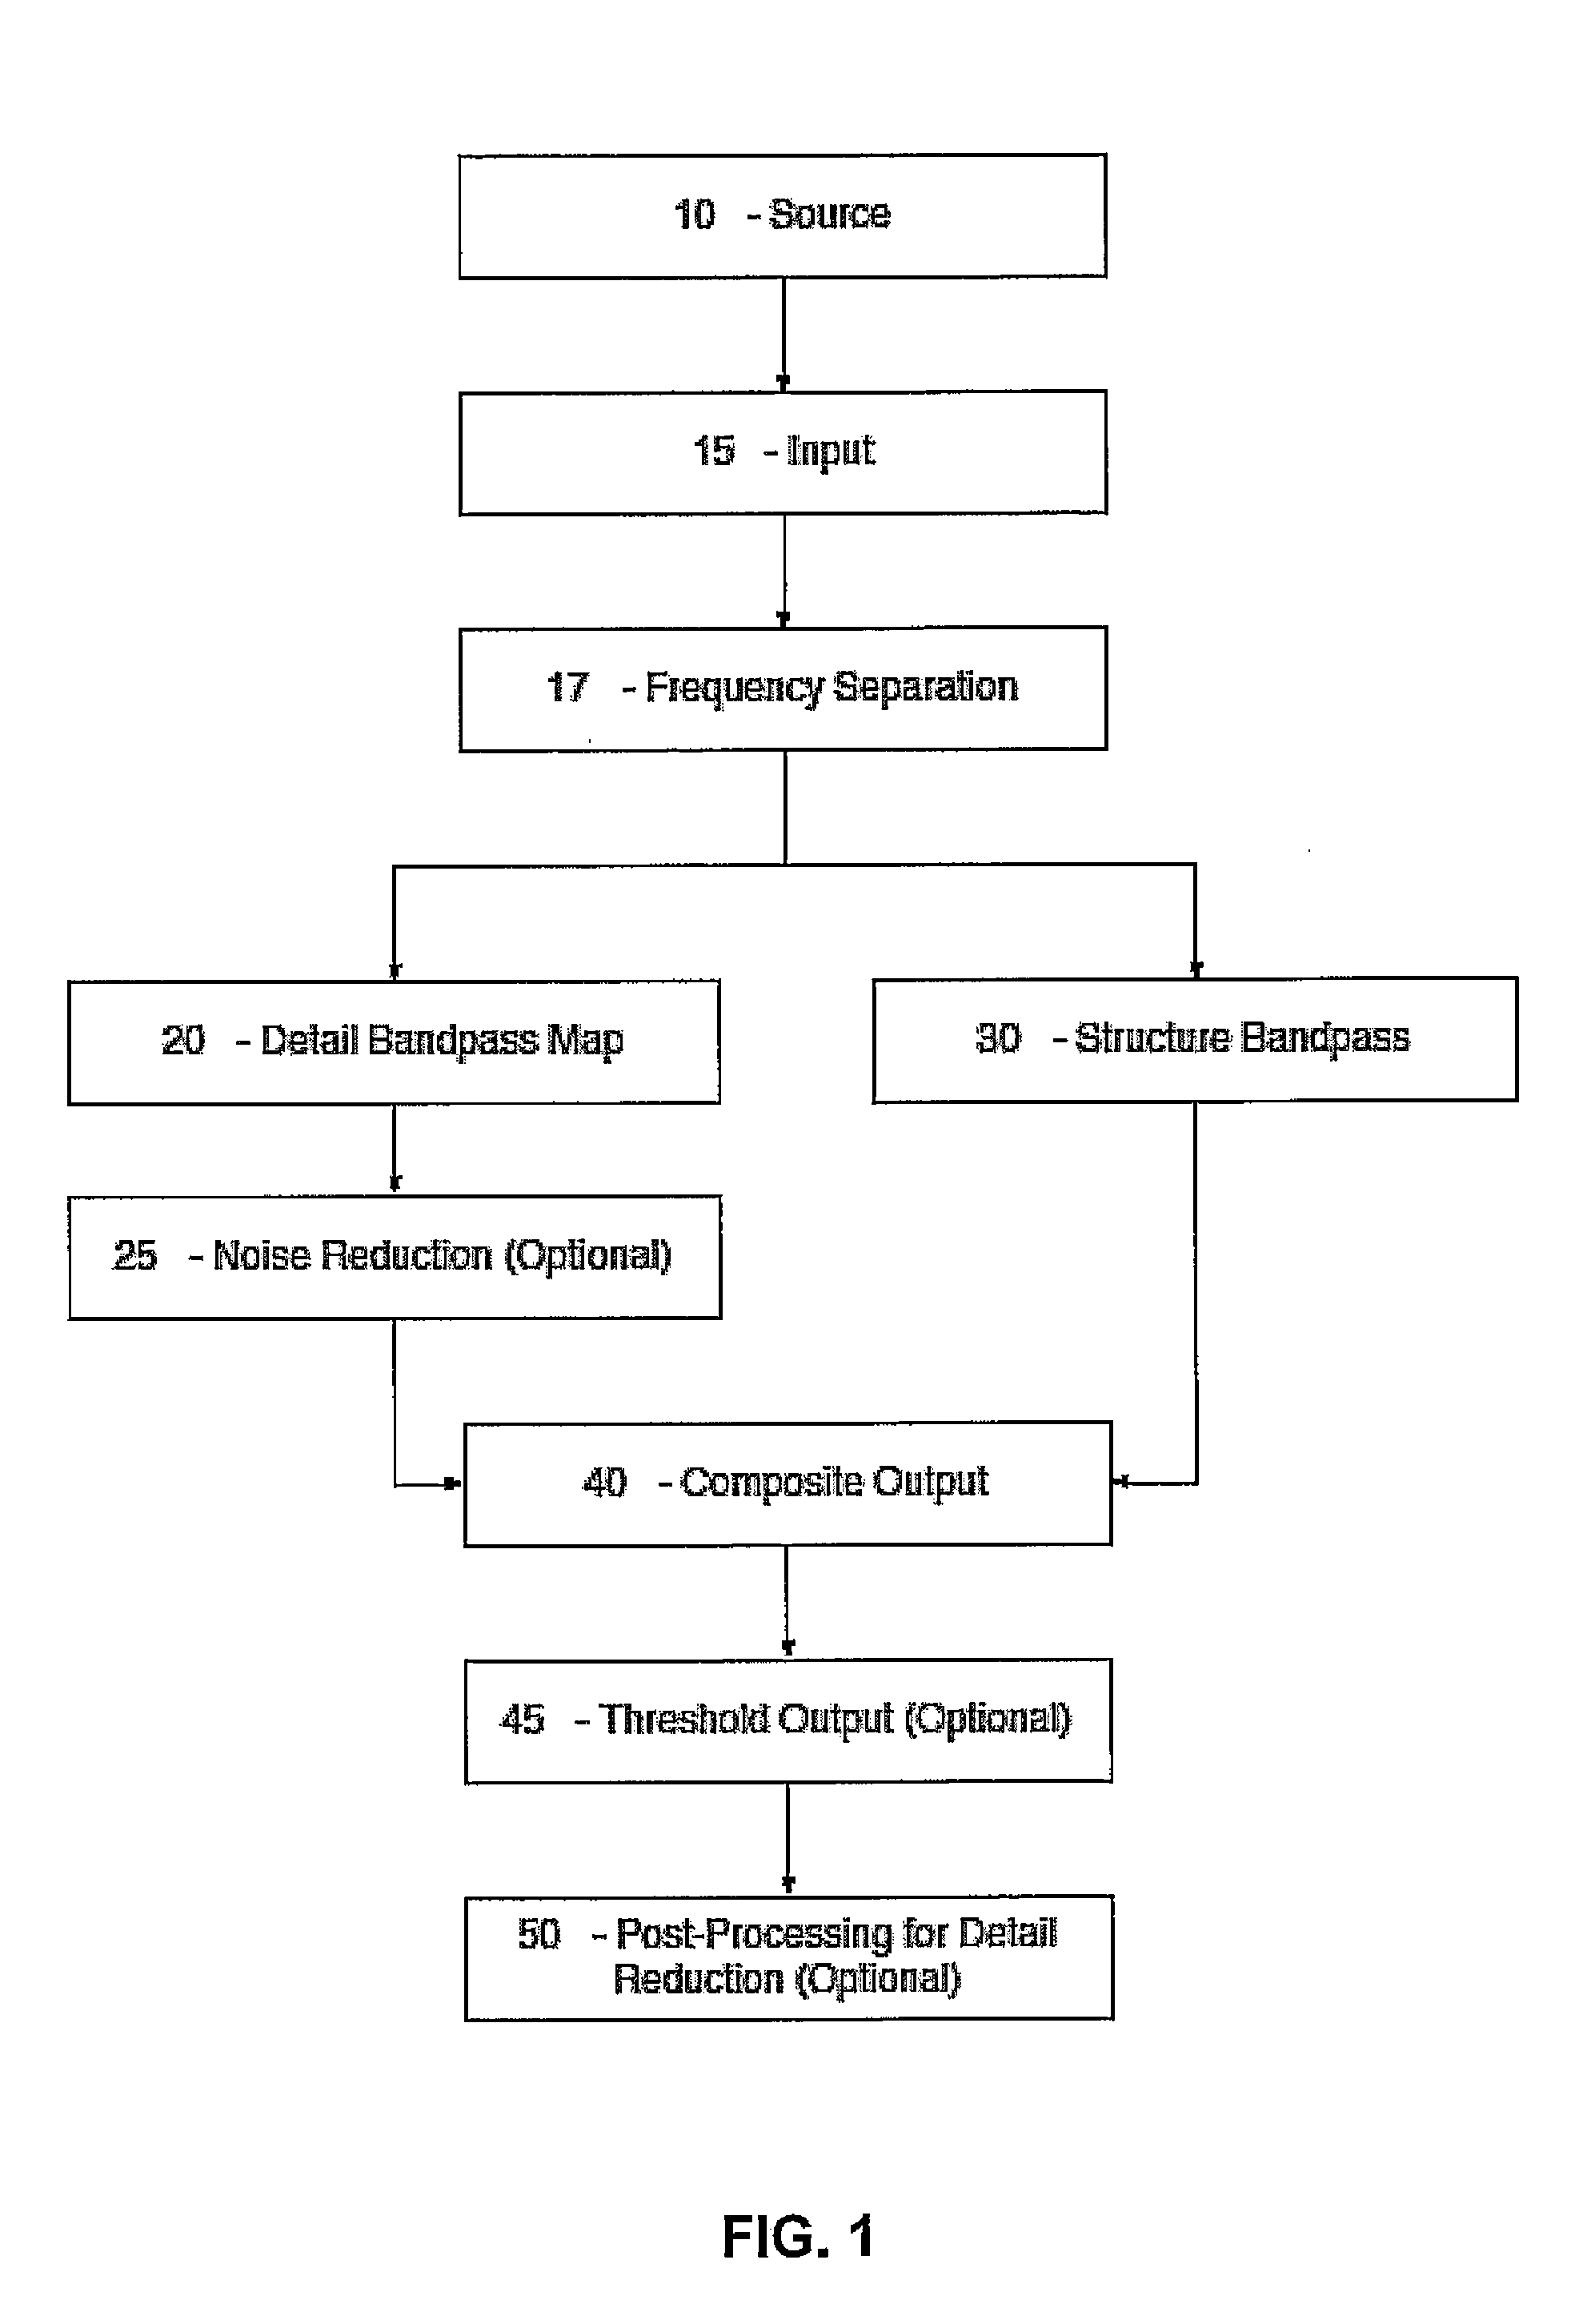 Method and System for Analog/Digital Image Simplification and Stylization